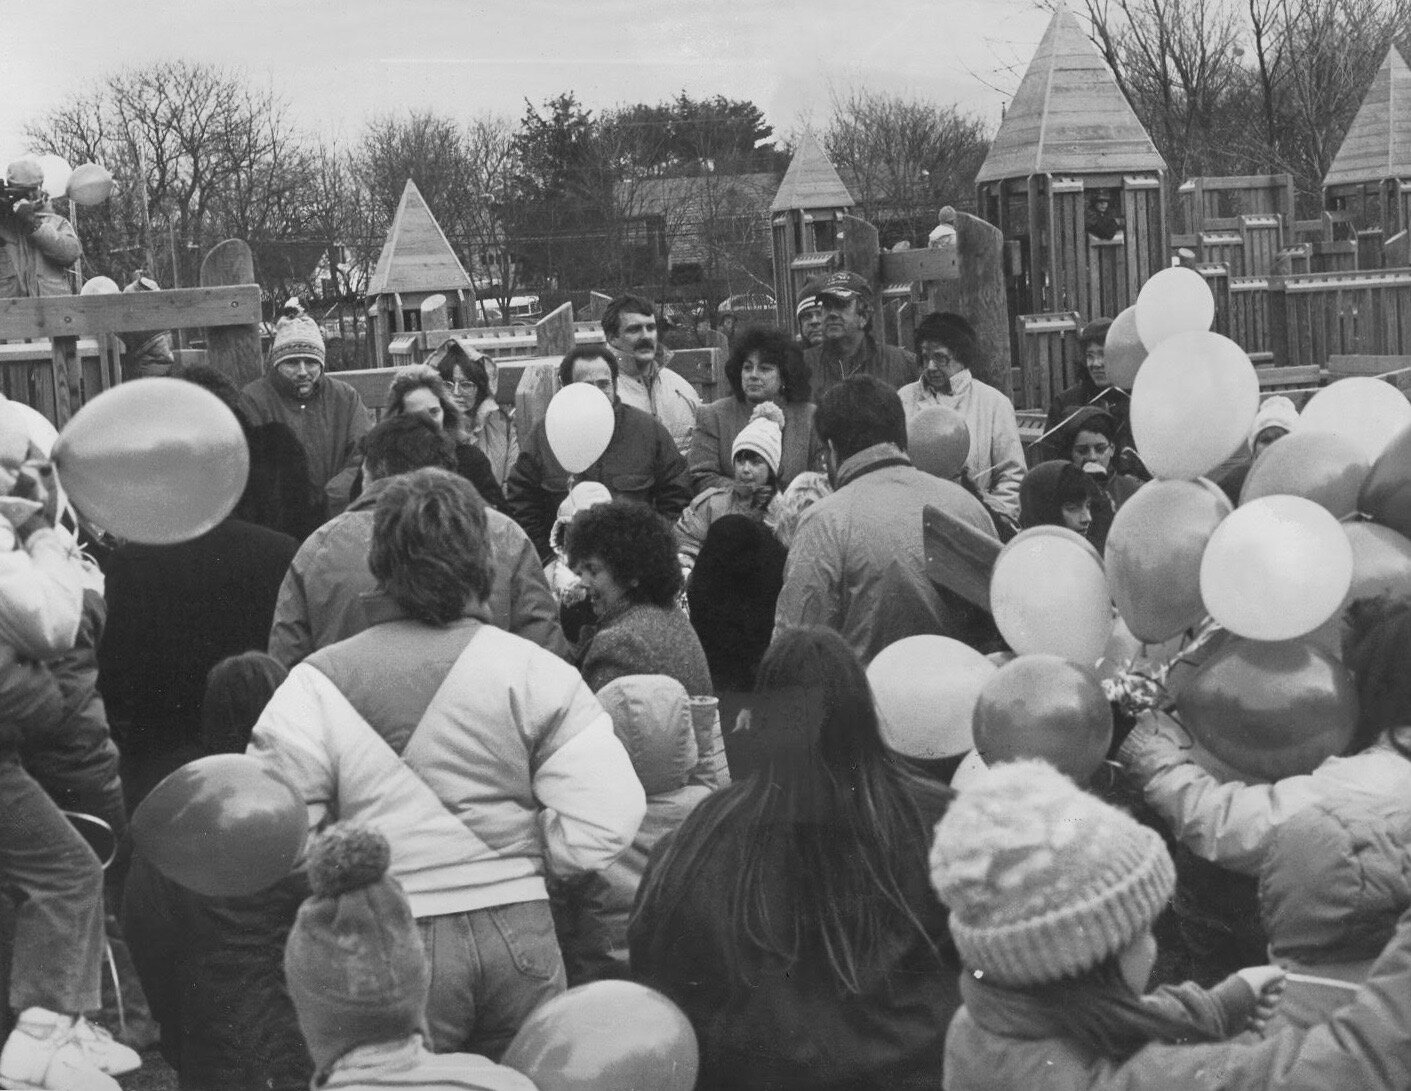 Back in 1987, the feeling in the air was “jubilance after community members worked tirelessly over five days in the rain to build a community play structure, the Eagle’s Nest. 